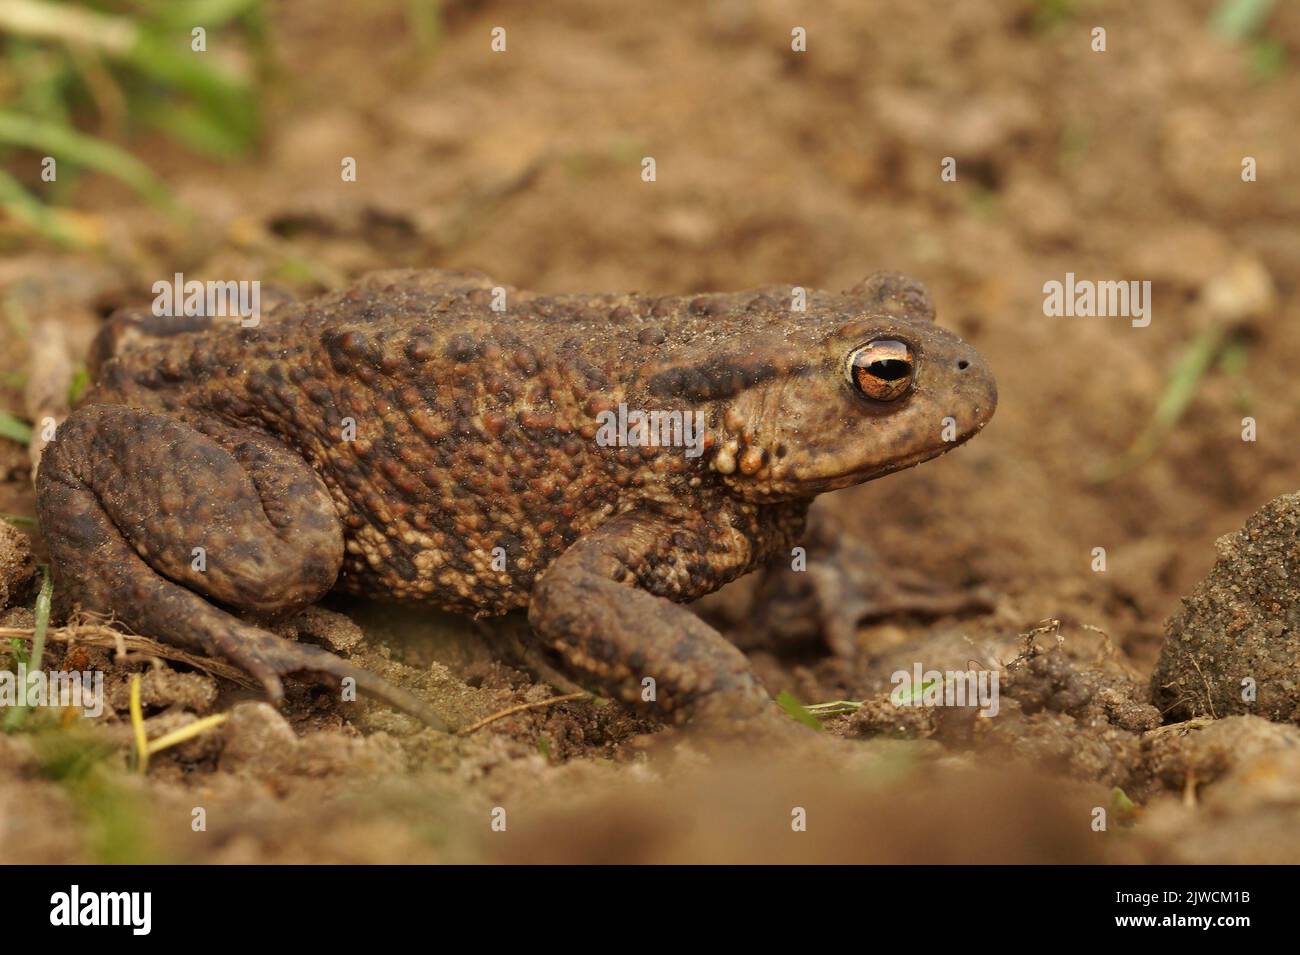 Closeup on a healthy female European common toad, Bufo bufo sitting on the ground in the garden Stock Photo